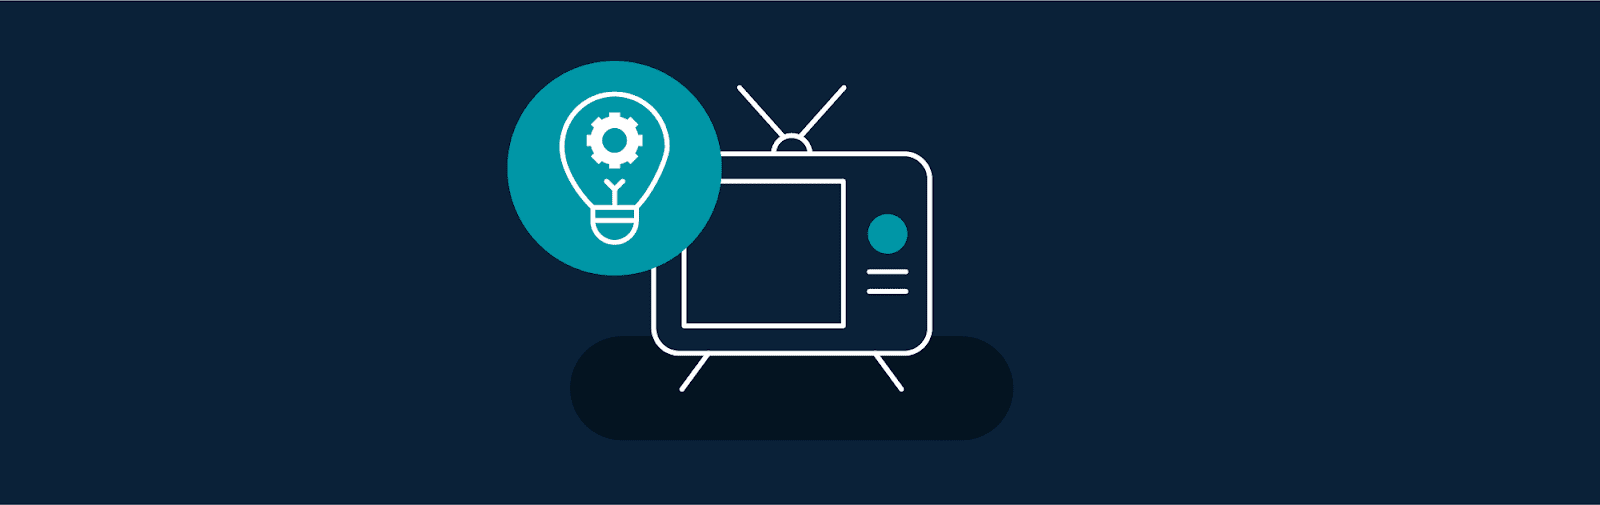 icon of a television set with a lightbulb overlaid